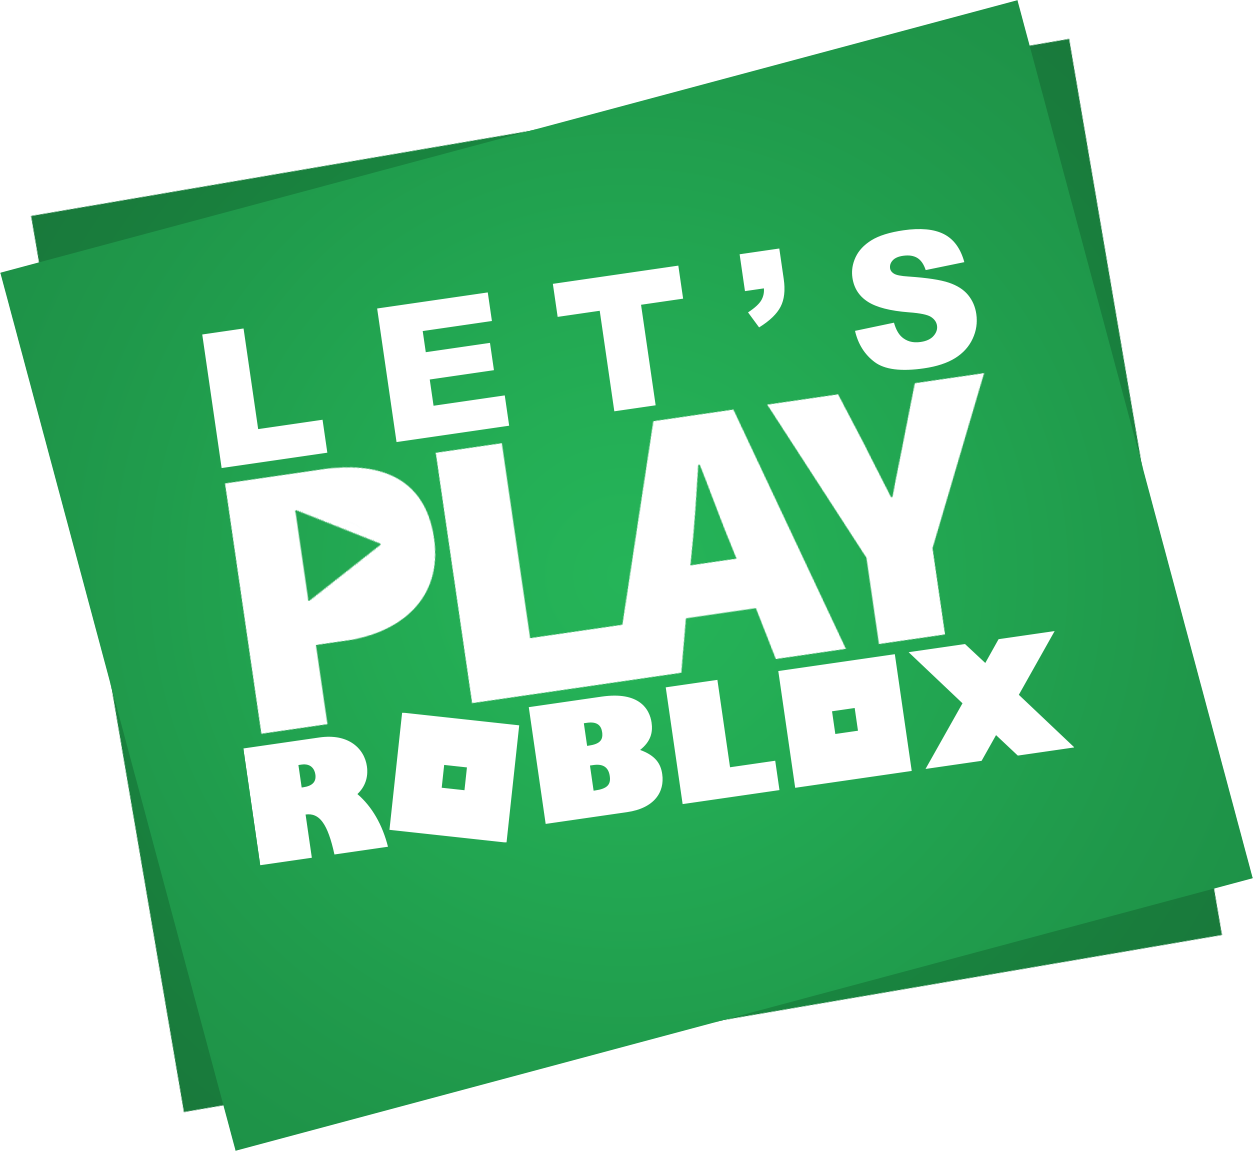 Roblox On Twitter Fly Through The Air Sail The Seas And Rev Those Engines Letsplayroblox Is Riding Through Vehicle Games 2pm Pdt Https T Co 2ufmigudb1 Https T Co Taknvmsh57 - lohith gaming roblox